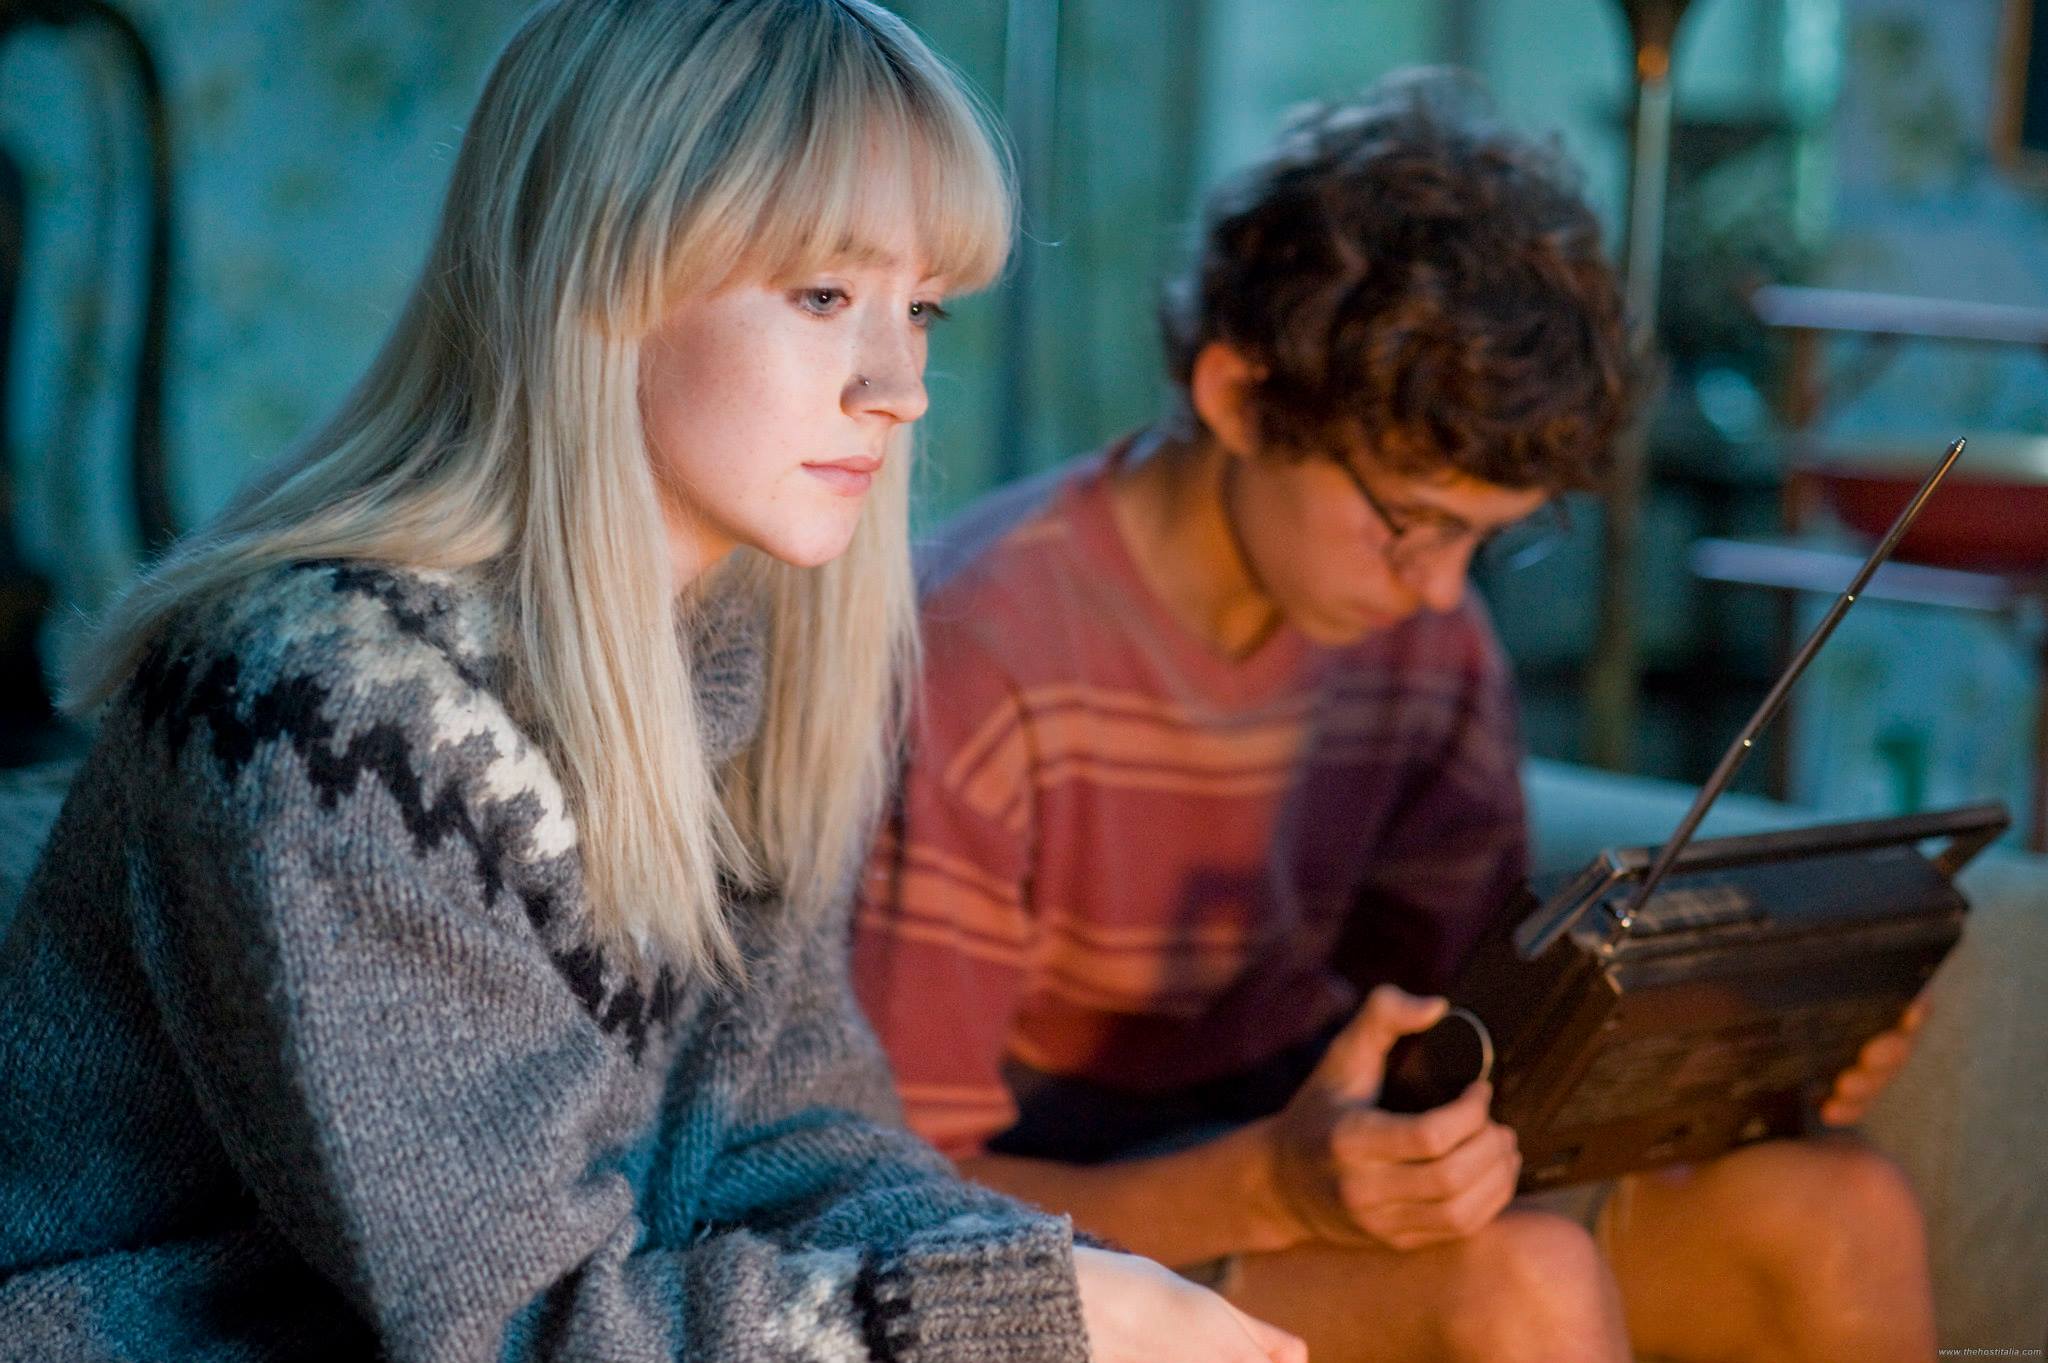 Saoirse Ronan in How I Live Now